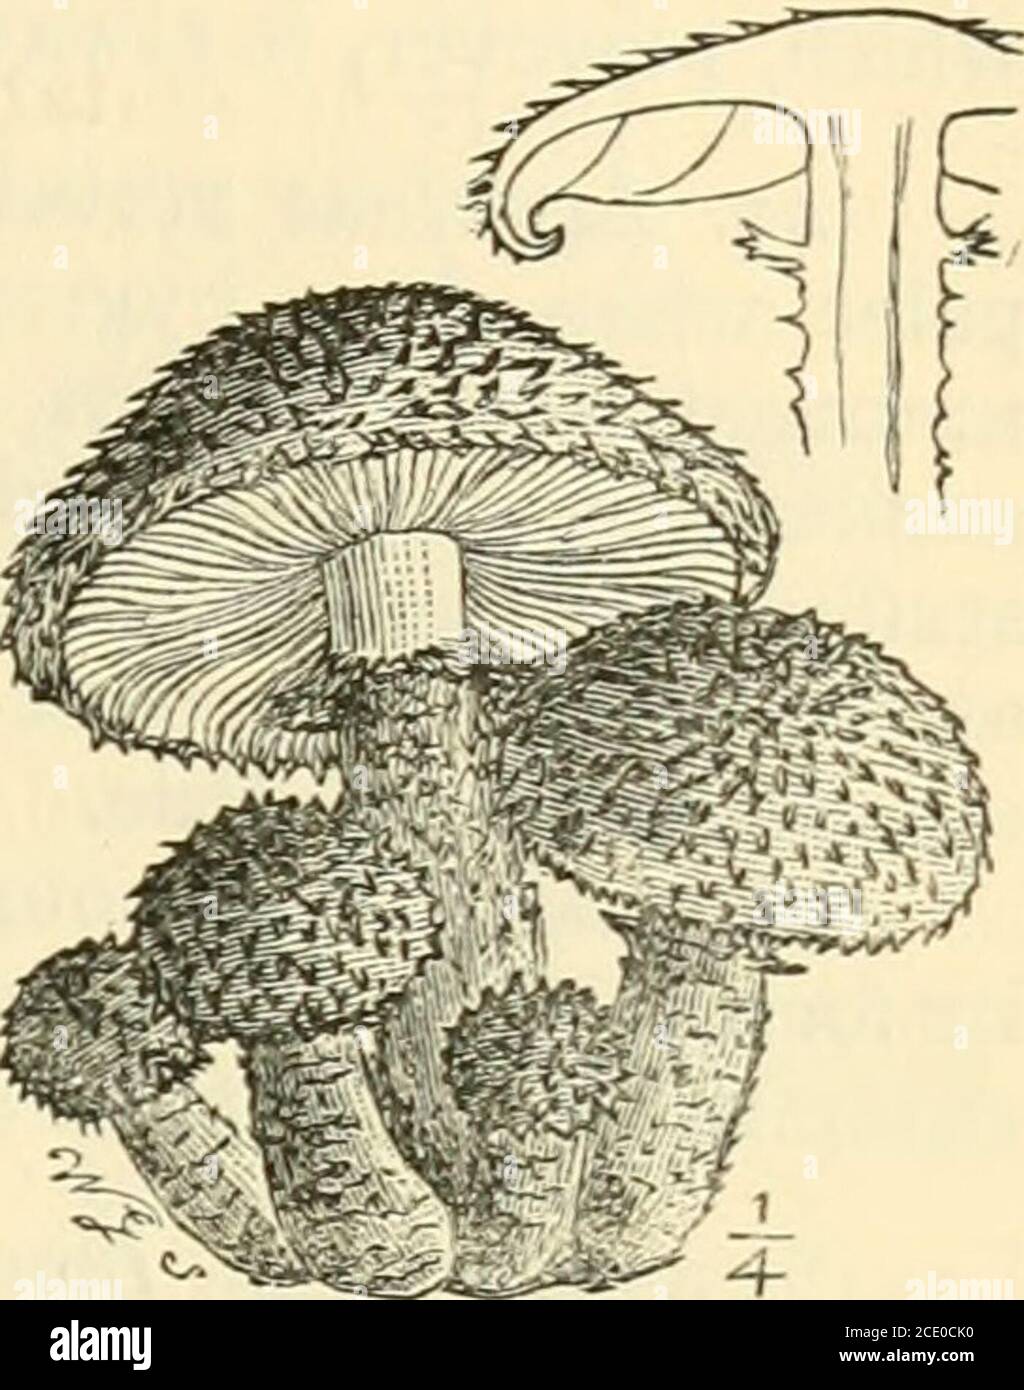 . Guide to Sowerby's models of British fungi in the Department of Botany, British Museum (Natural History) . GUIDE TO THE MODELS OF FUNGI. 25. rurTpr ^^- 8.—Type form of Pholiota.t-uivcu, Agaricus squarrosus Milll. ferruginous - brown. There are 226 British species of Dermim,twelve of which are represented by models. The Cortinarii Sive frequently mistaken for the larger Dermini-but they have bright-brown spores like iron-rust, an arachnoid veiland a terrestrial habit. Many of the Dermini grow on or aboutstumps, trunks, branches, chips, etc. Sub-genus 14. Pholiota.—There are twenty-eight Bri Stock Photo